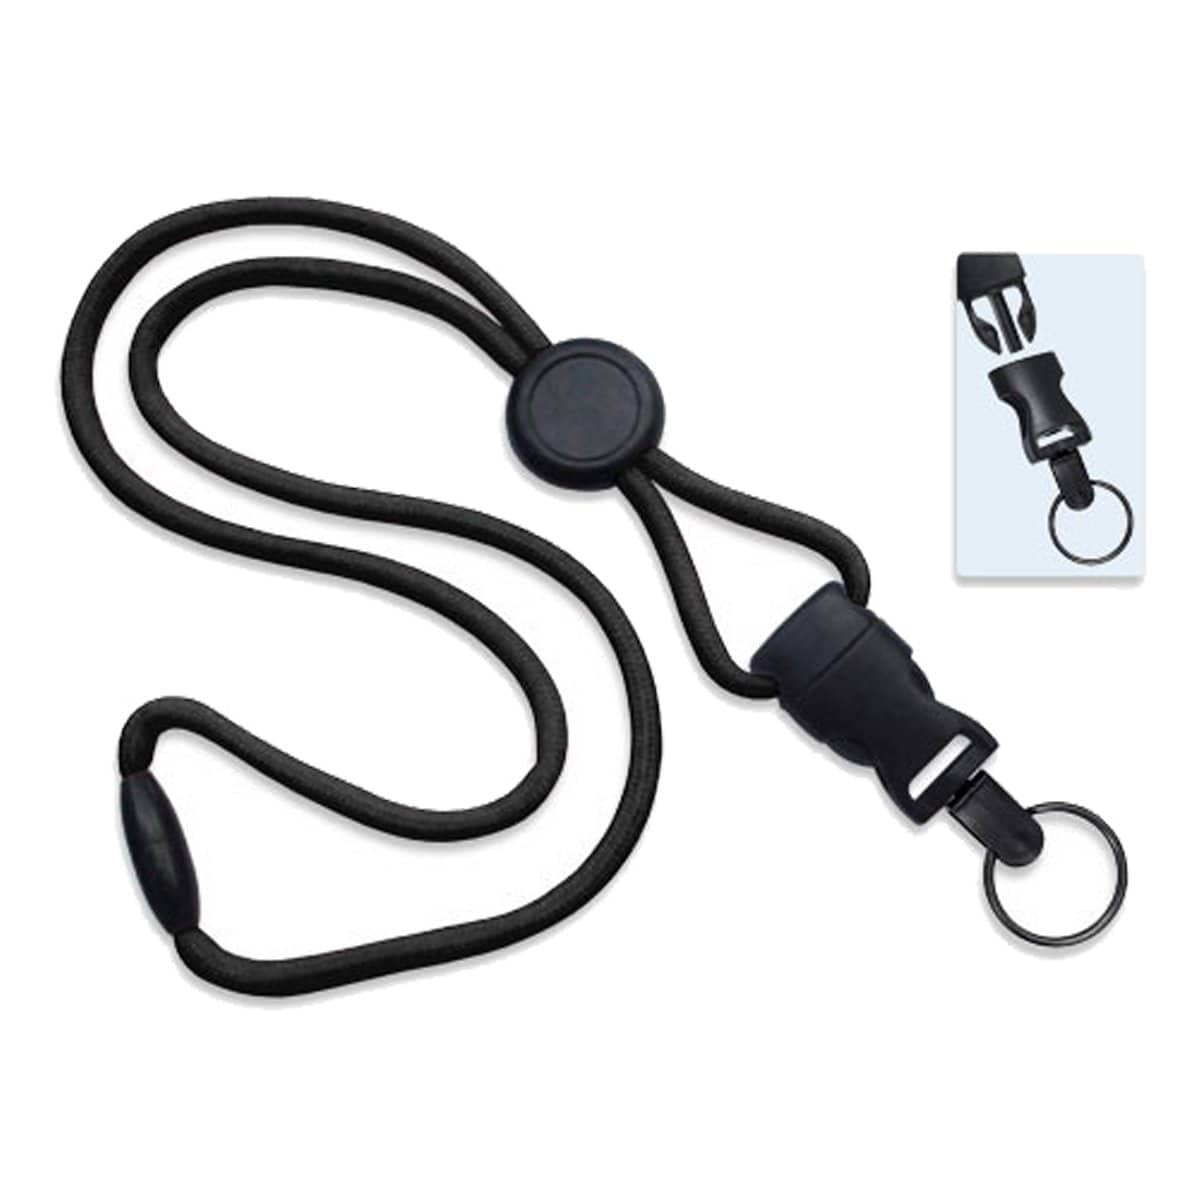 A Breakaway Lanyard with Round Slider And Detachable Key Ring 2135-461X with a detachable clip, breakaway safety features, and key ring attachment.